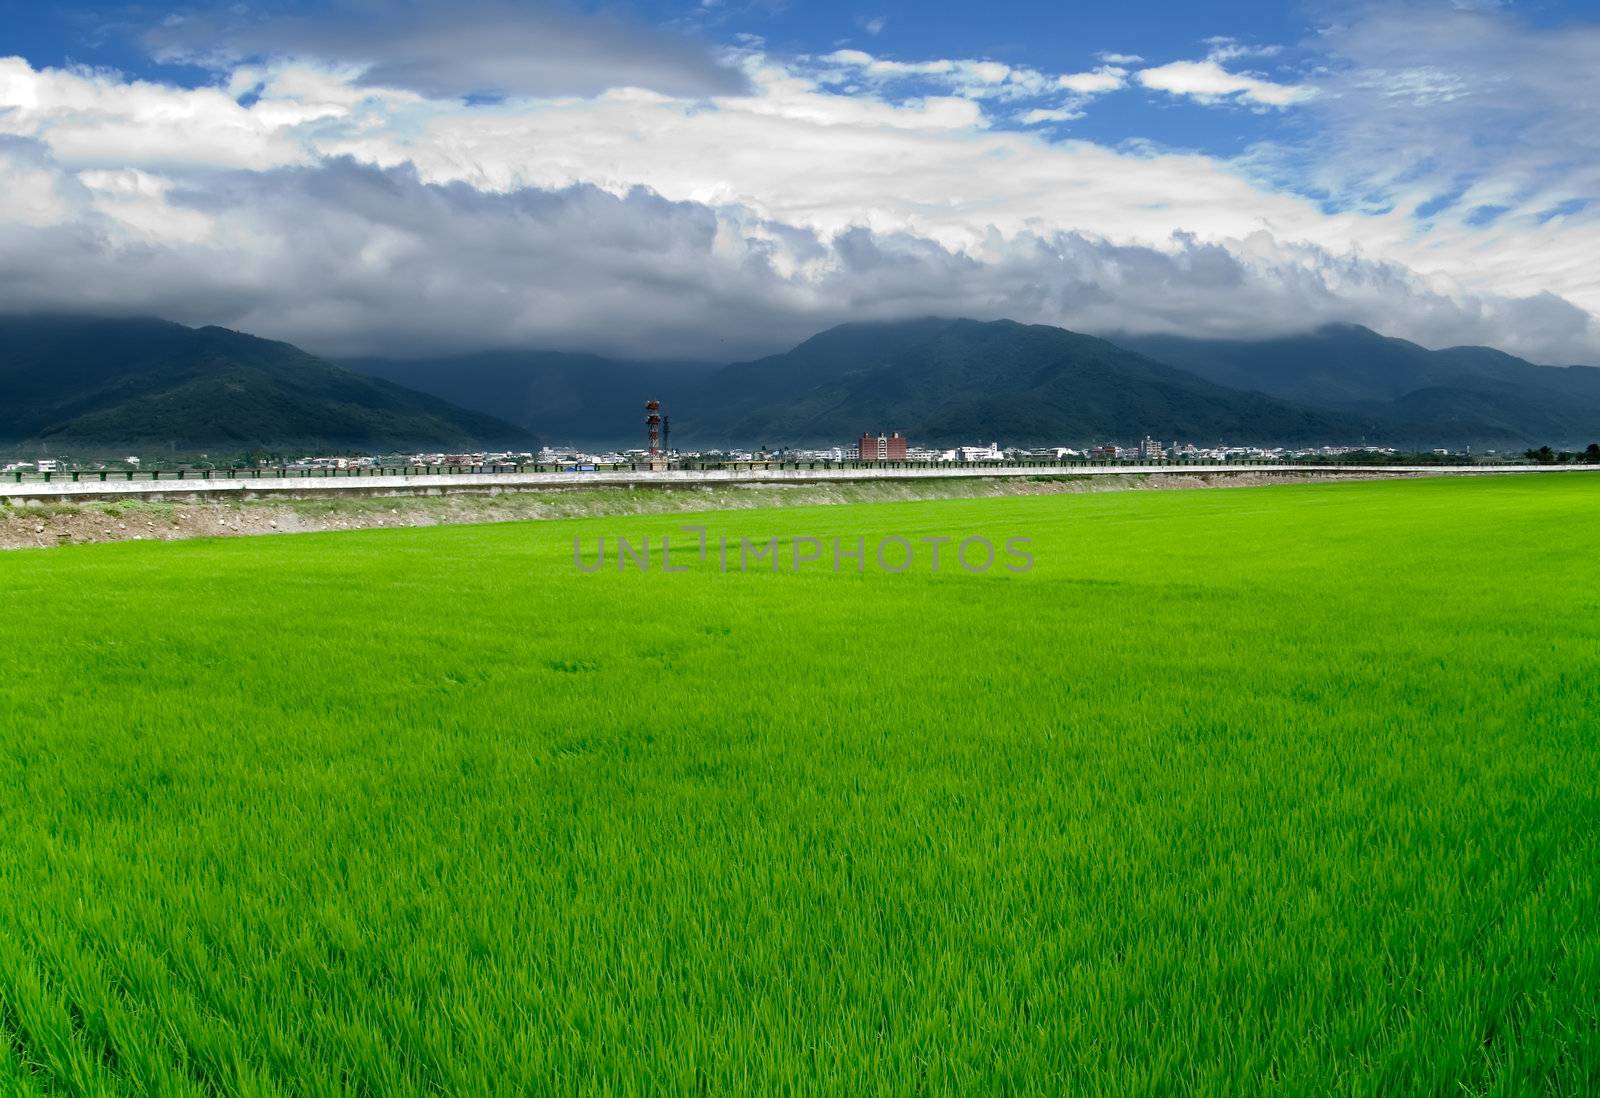 It is a green new rice land background.